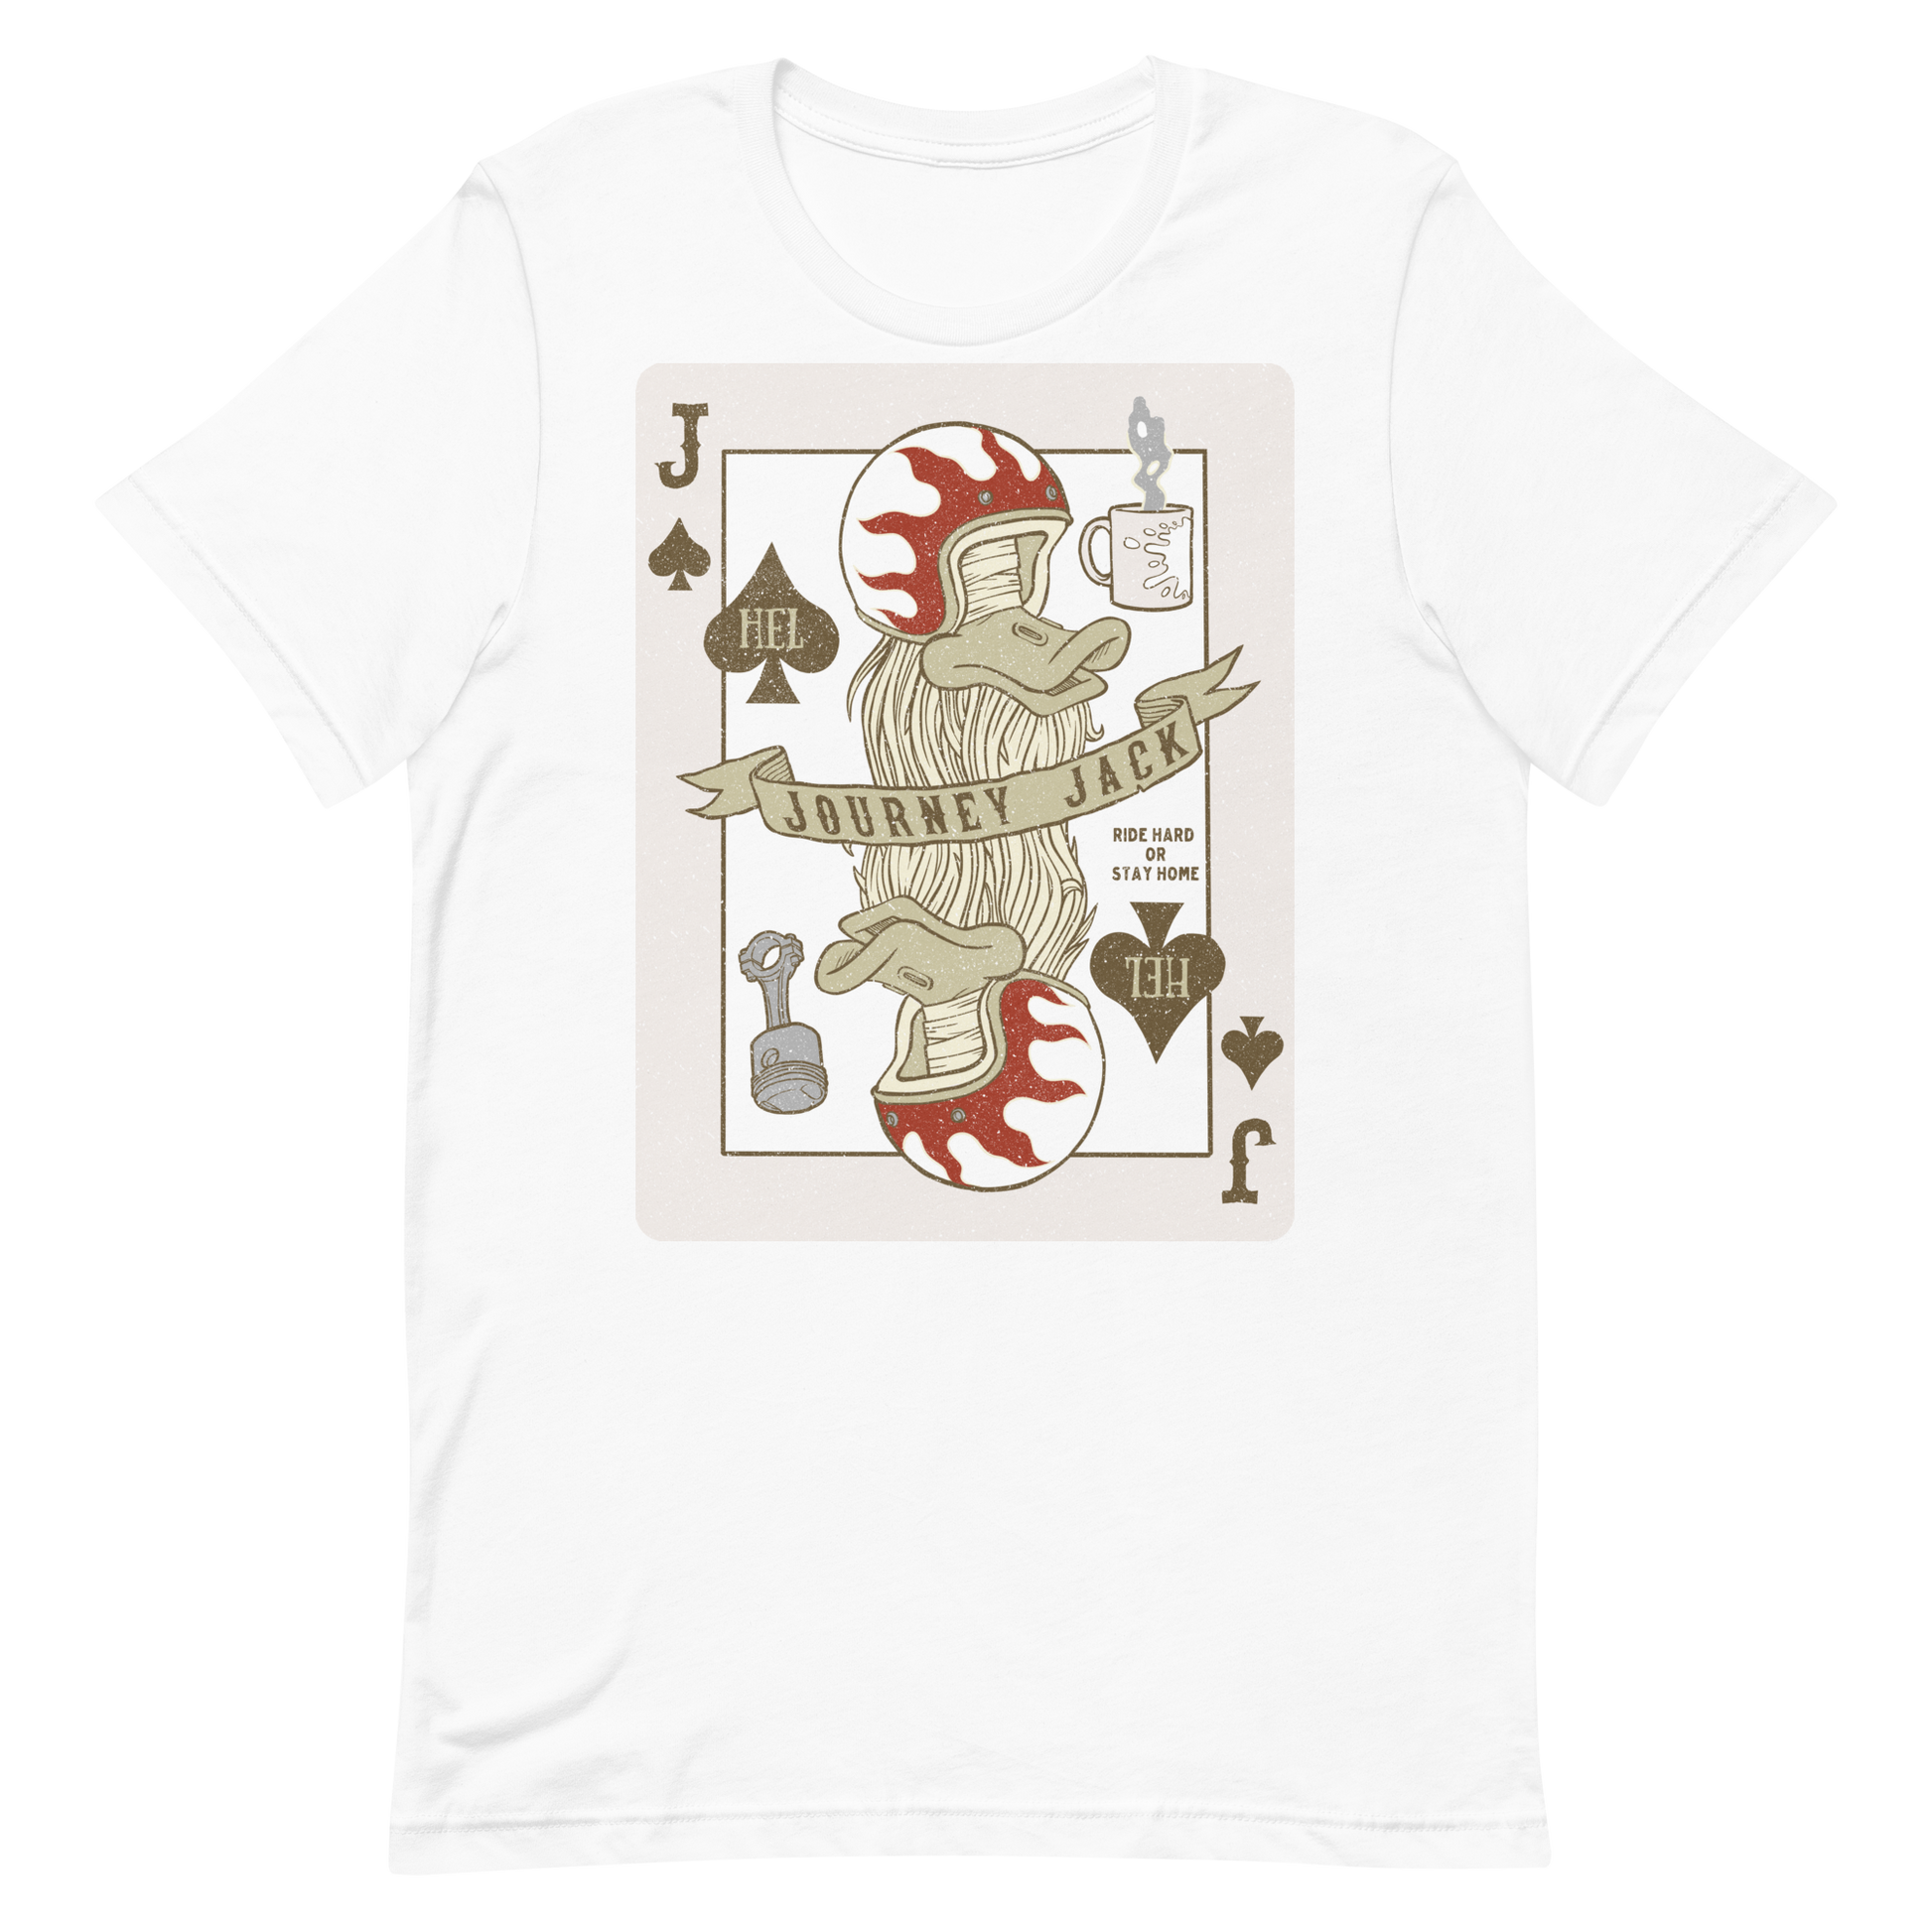 This Journey Jack Motorcycle Playing Card t-shirt is everything you've dreamed of and more. It feels soft and lightweight, with the right amount of stretch. It's comfortable and flattering for all.